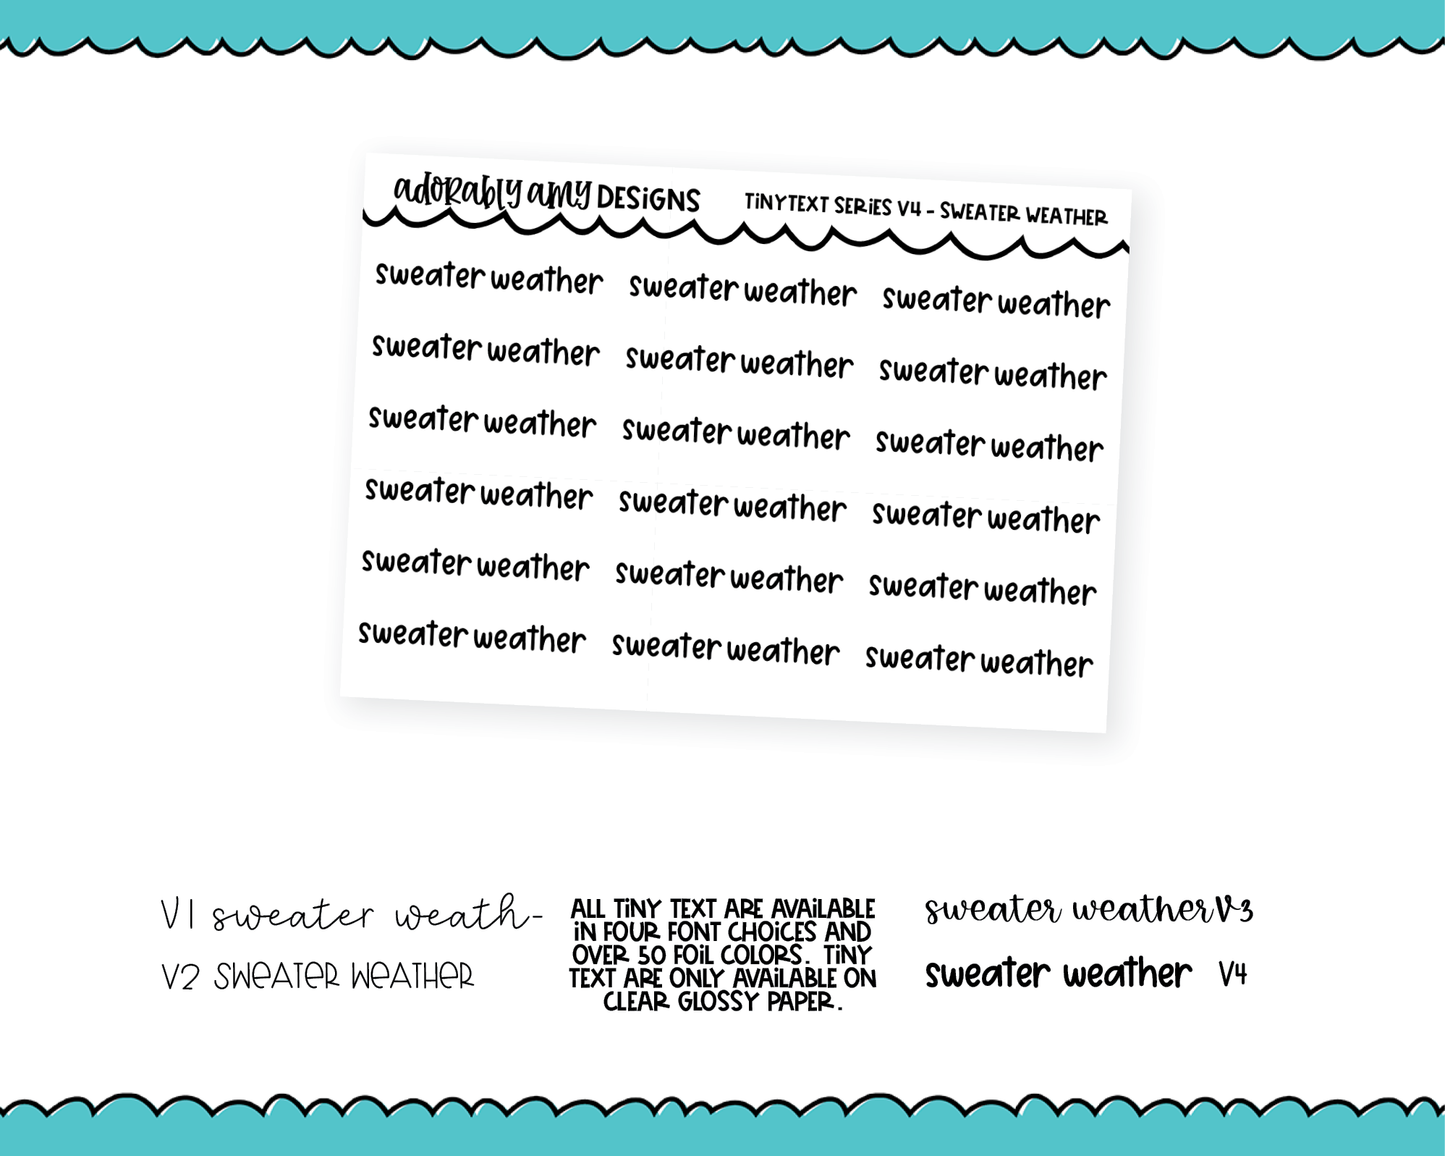 Foiled Tiny Text Series - Sweater Weather Checklist Size Planner Stickers for any Planner or Insert